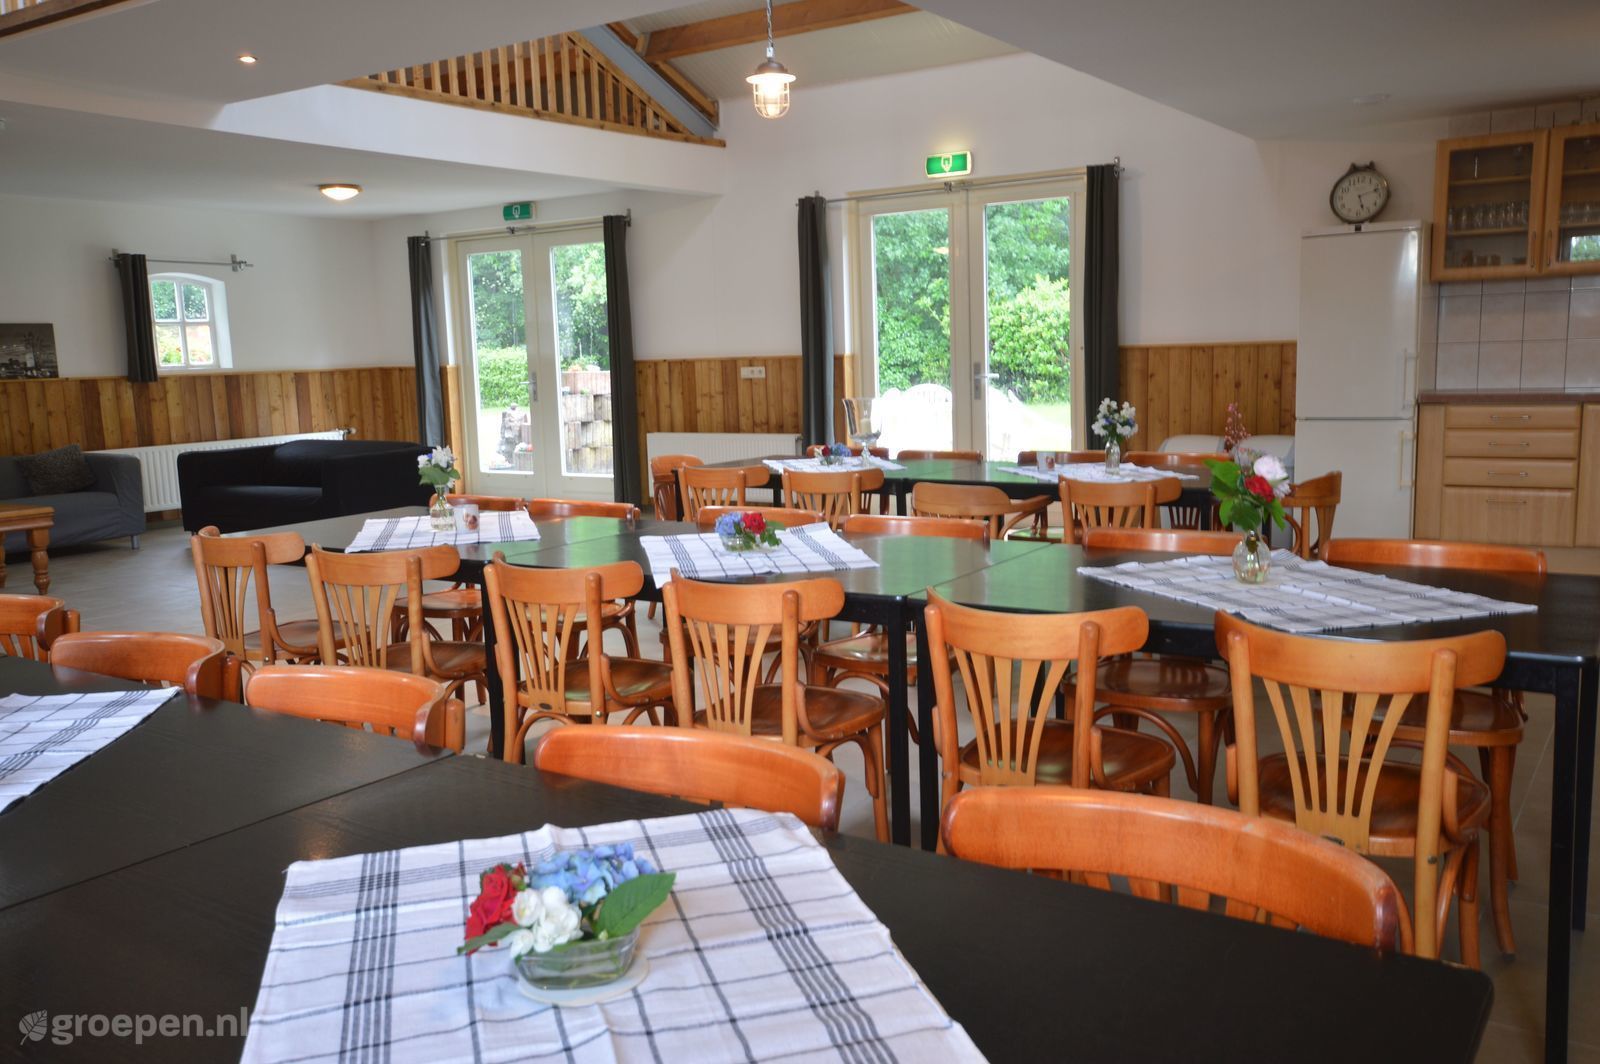 Group accommodation Odiliapeel